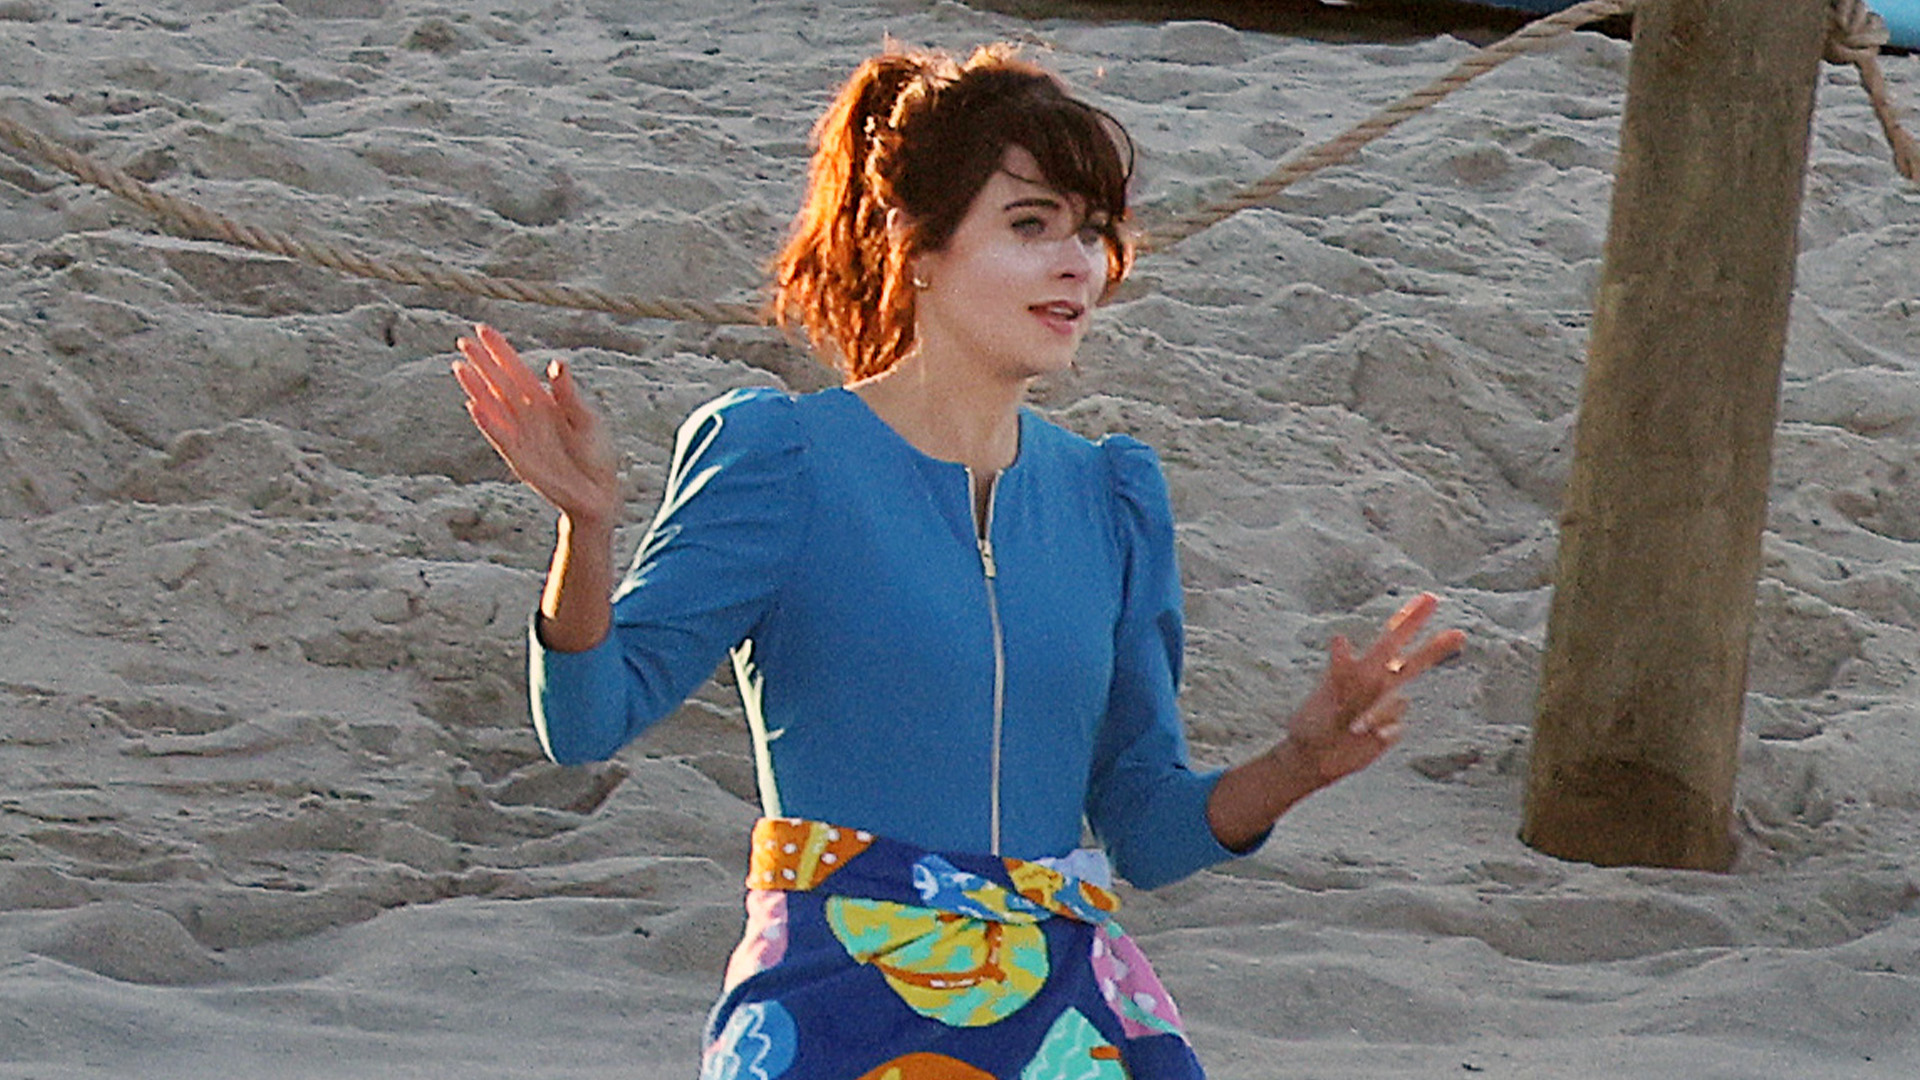 Run like Zooey Deschanel in a chic baby blue bathing suit on the beach with Charlie Cox for Merv film